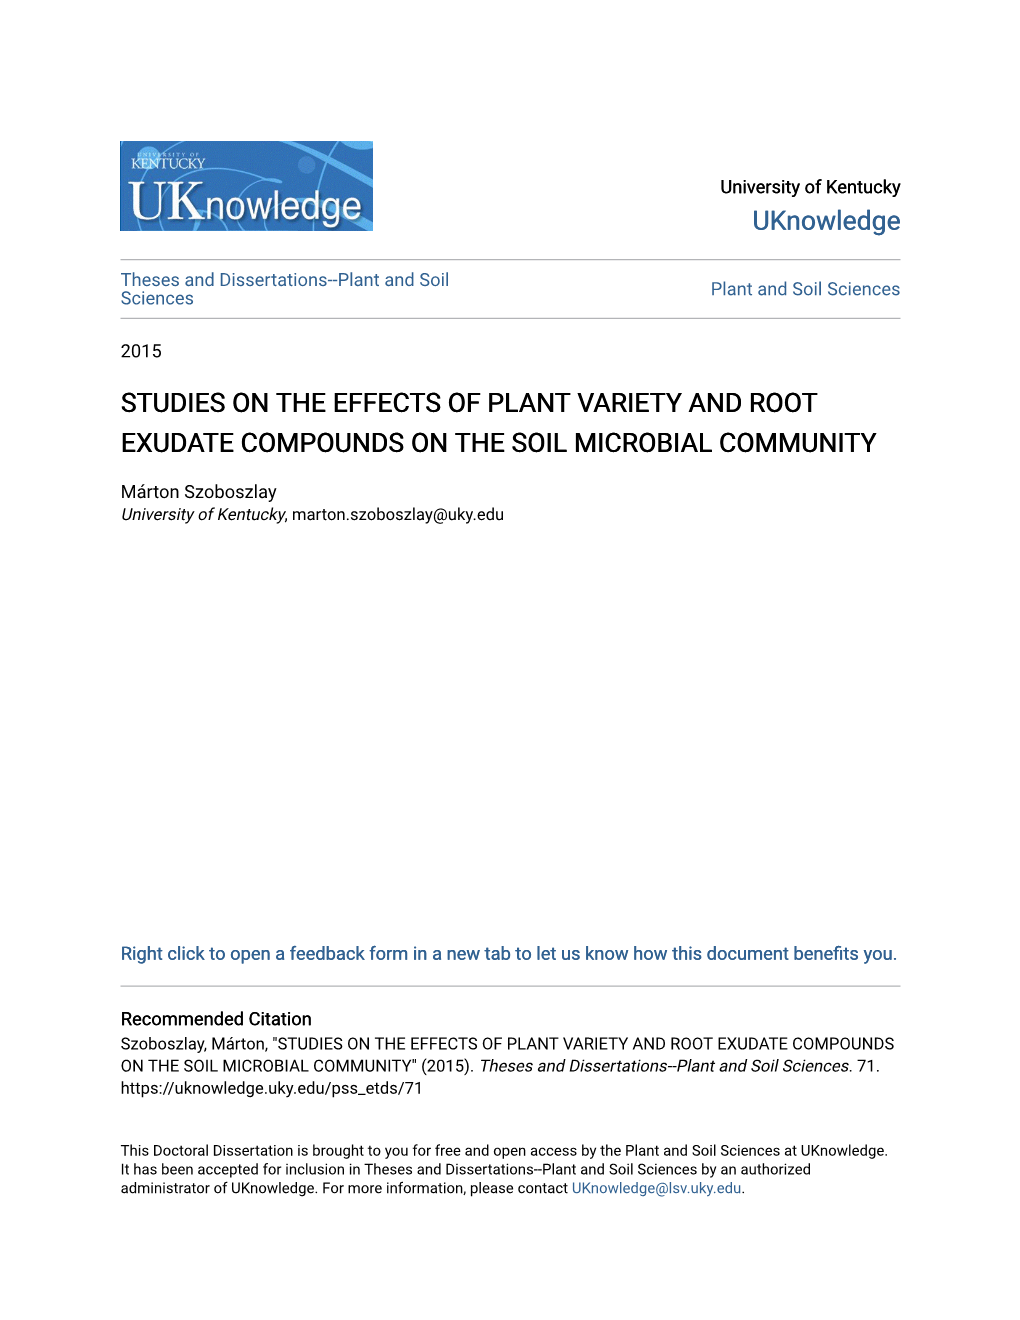 Studies on the Effects of Plant Variety and Root Exudate Compounds on the Soil Microbial Community